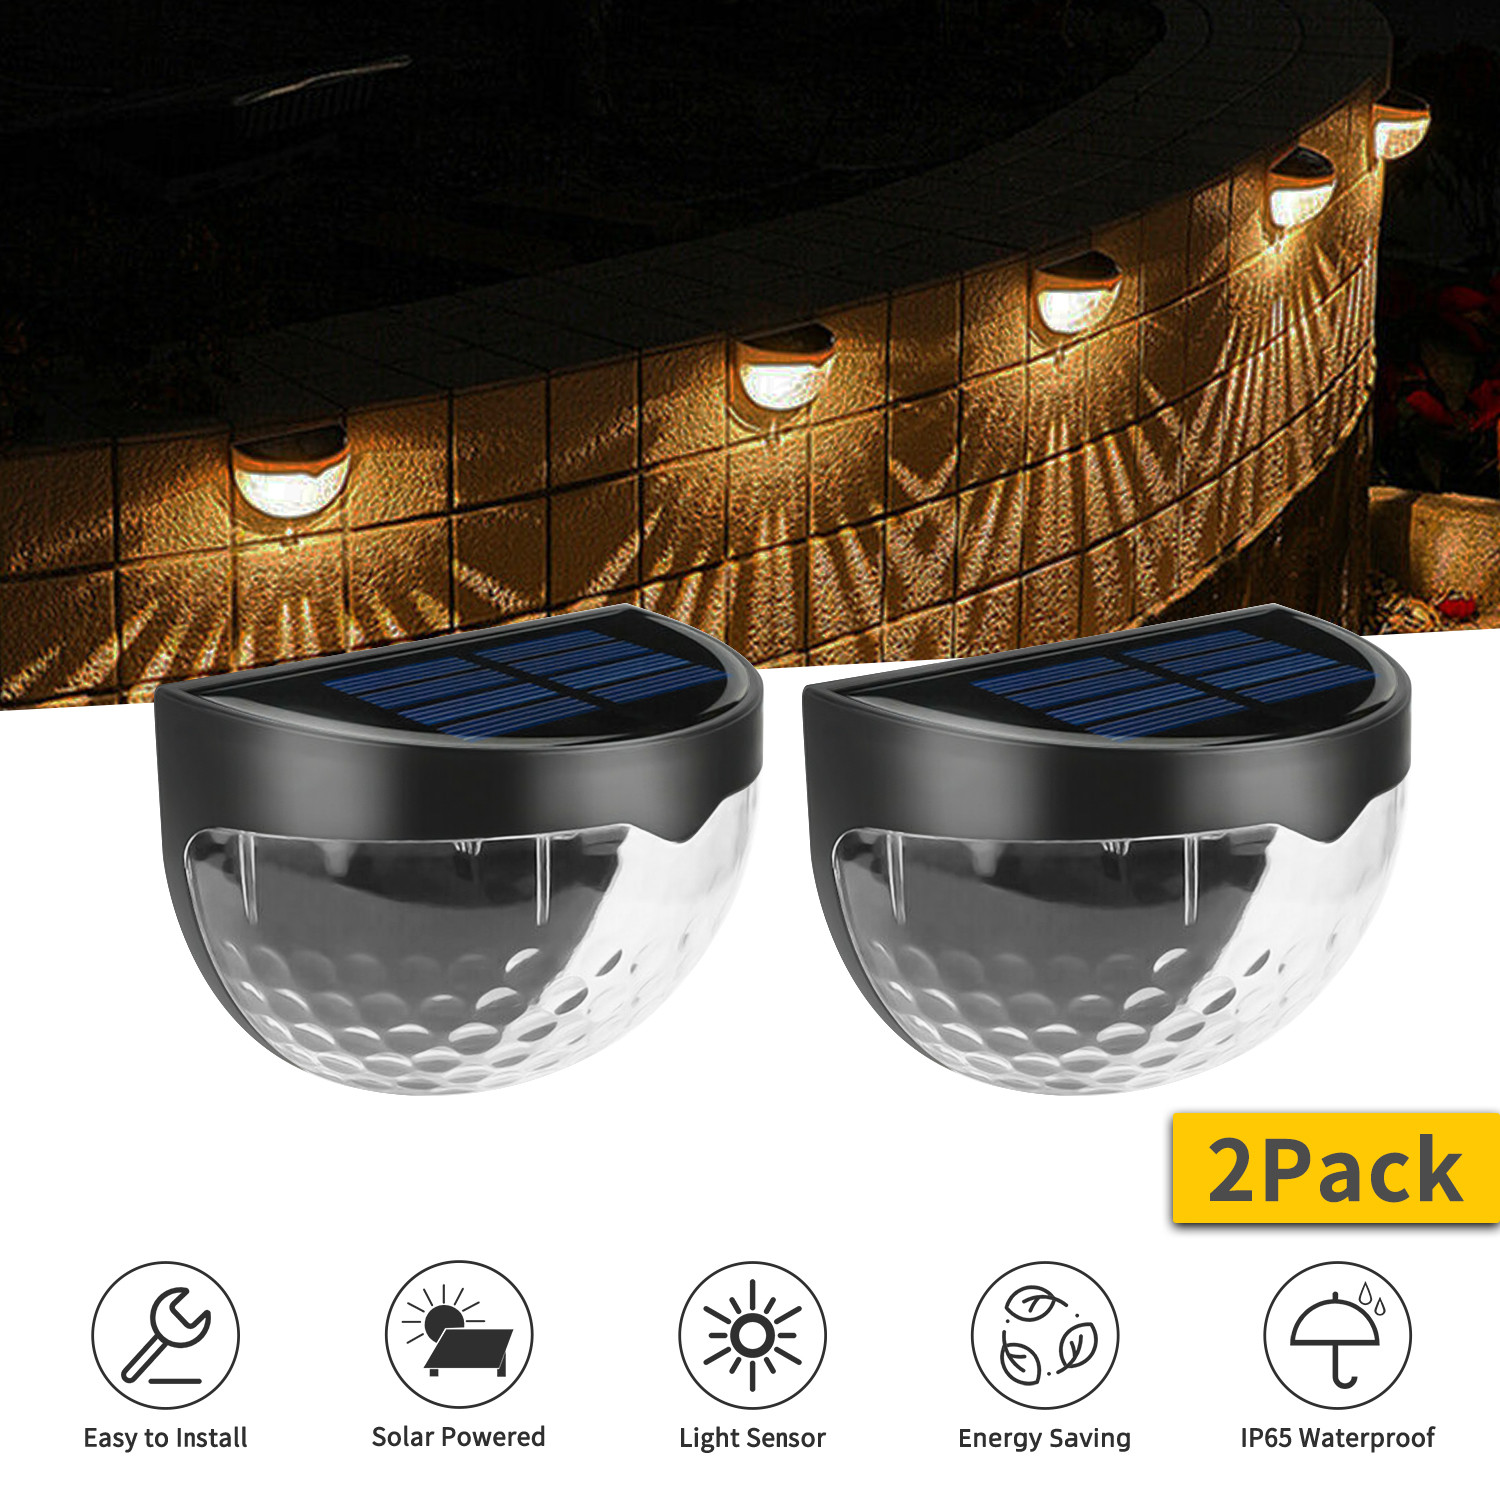 Elegant Choise Solar Wall Lights 6LED IP65 Waterproof Deck Lamps for Garden Fence Yard, 2 Pack - image 3 of 12